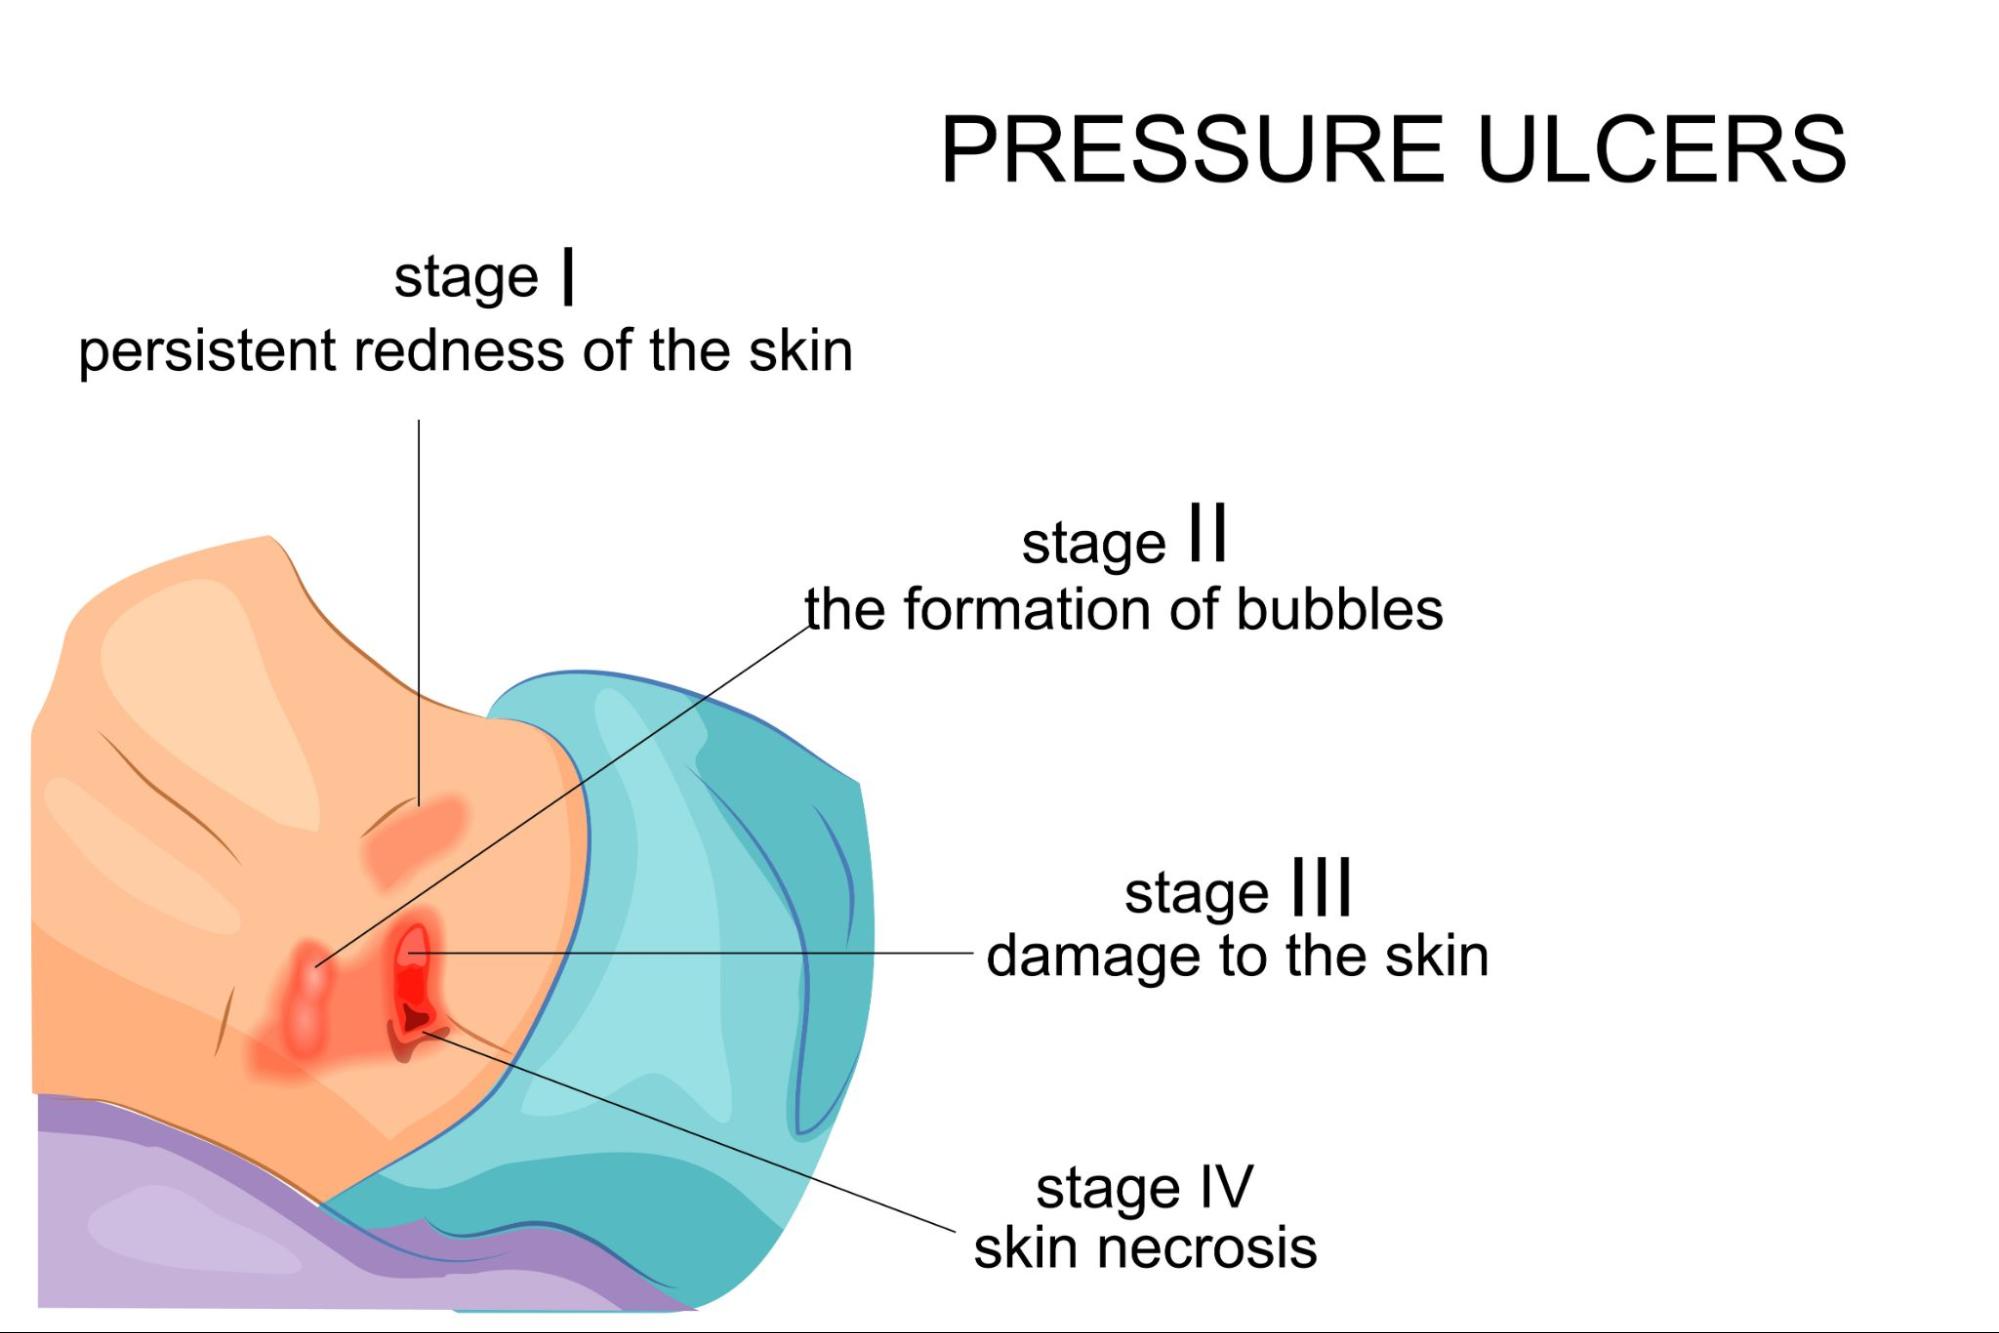 Stages of pressure ulcers